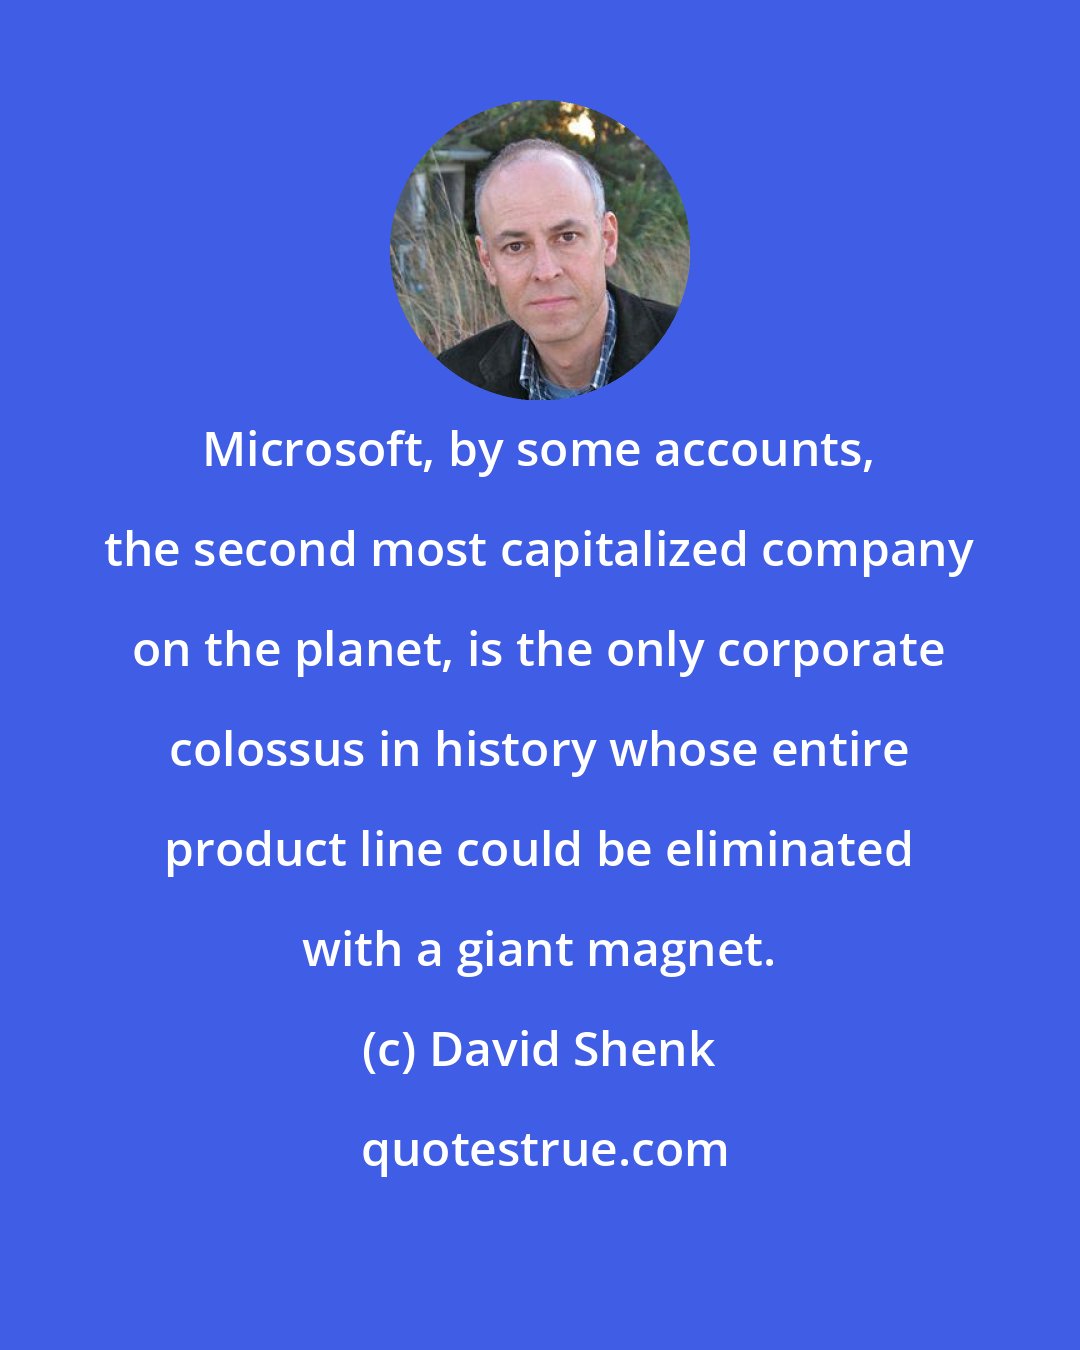 David Shenk: Microsoft, by some accounts, the second most capitalized company on the planet, is the only corporate colossus in history whose entire product line could be eliminated with a giant magnet.